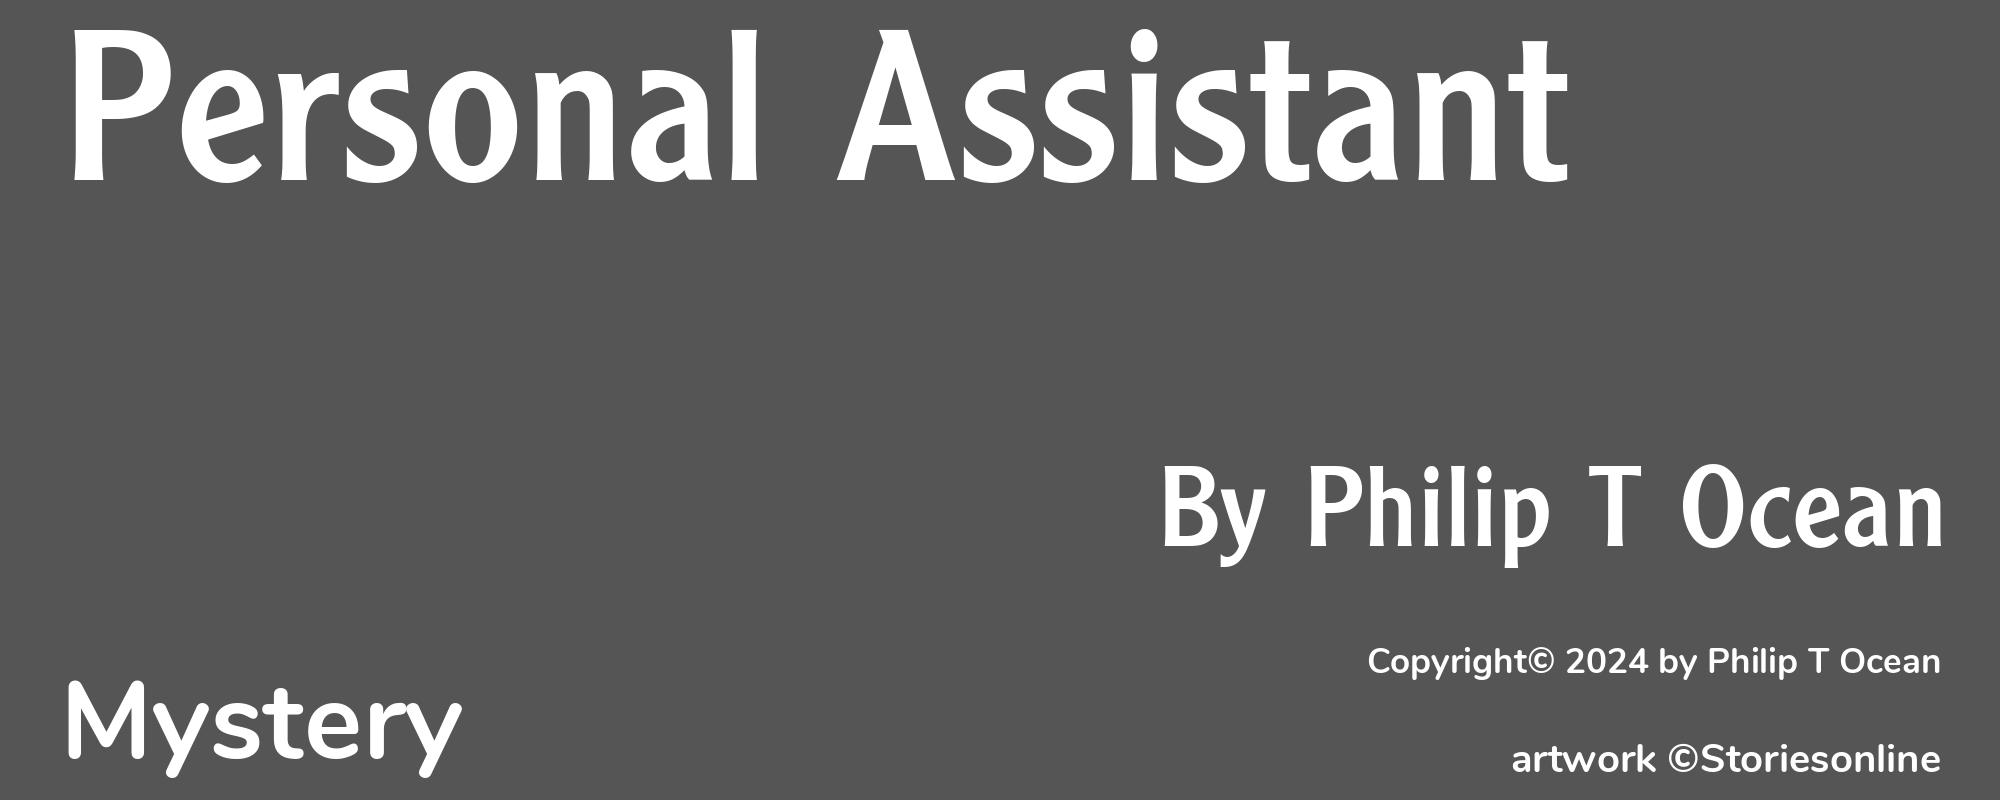 Personal Assistant - Cover